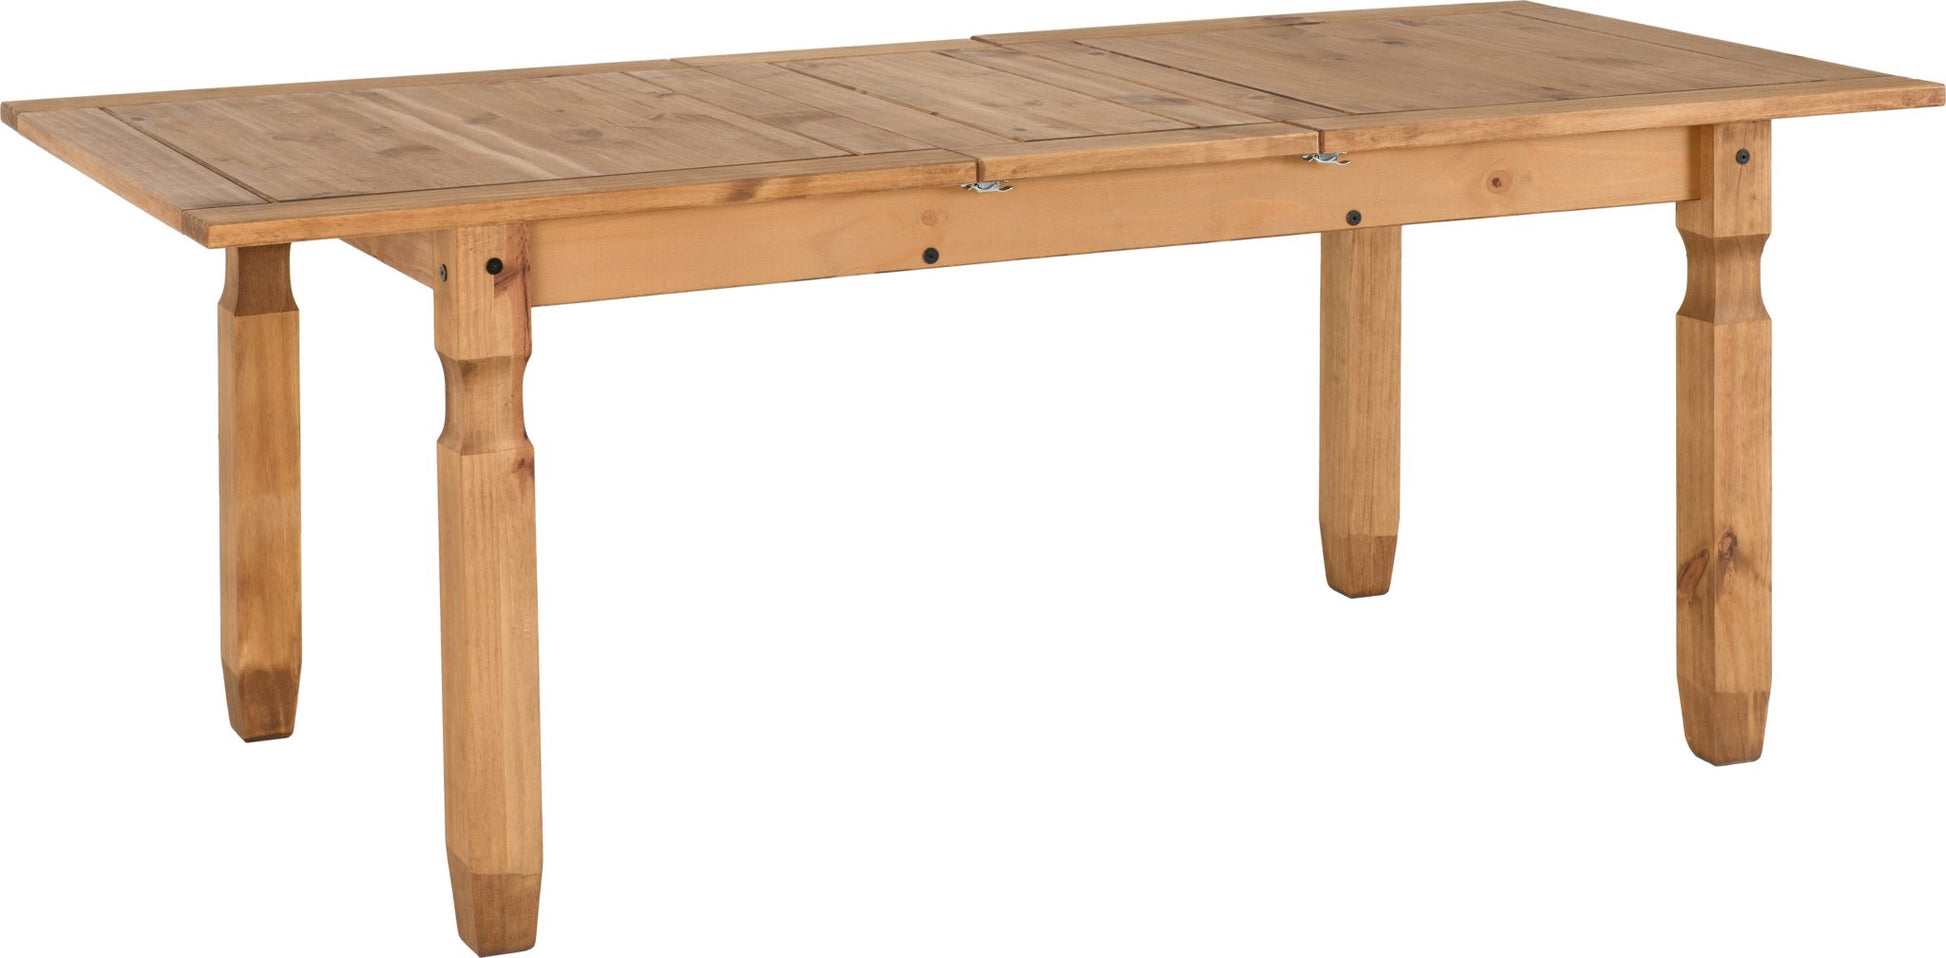 Corona Extending Dining Table - Distressed Waxed